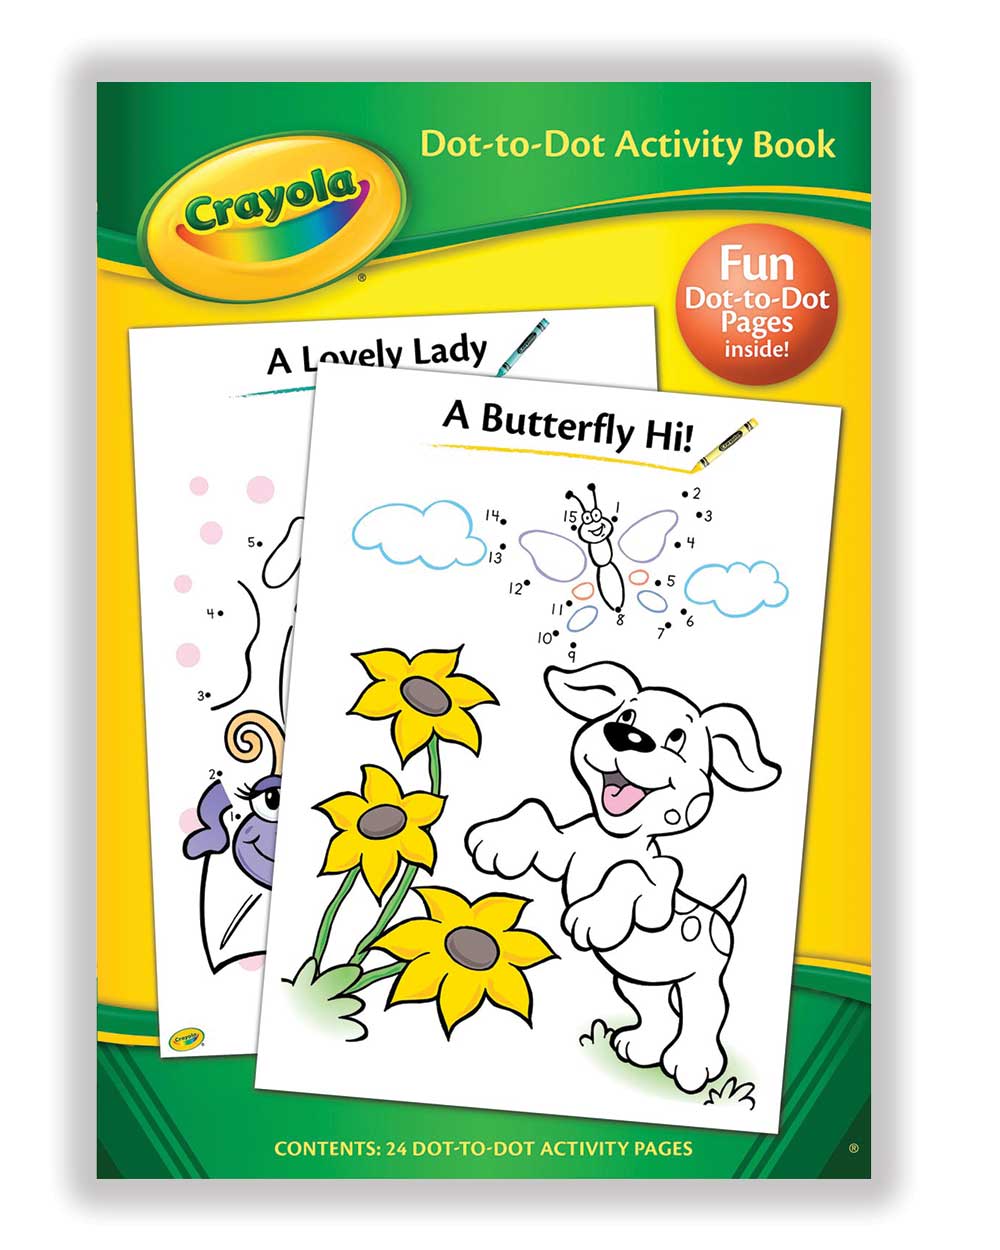 dot to dot activity book kids crayola colouring book front cover on a white back ground